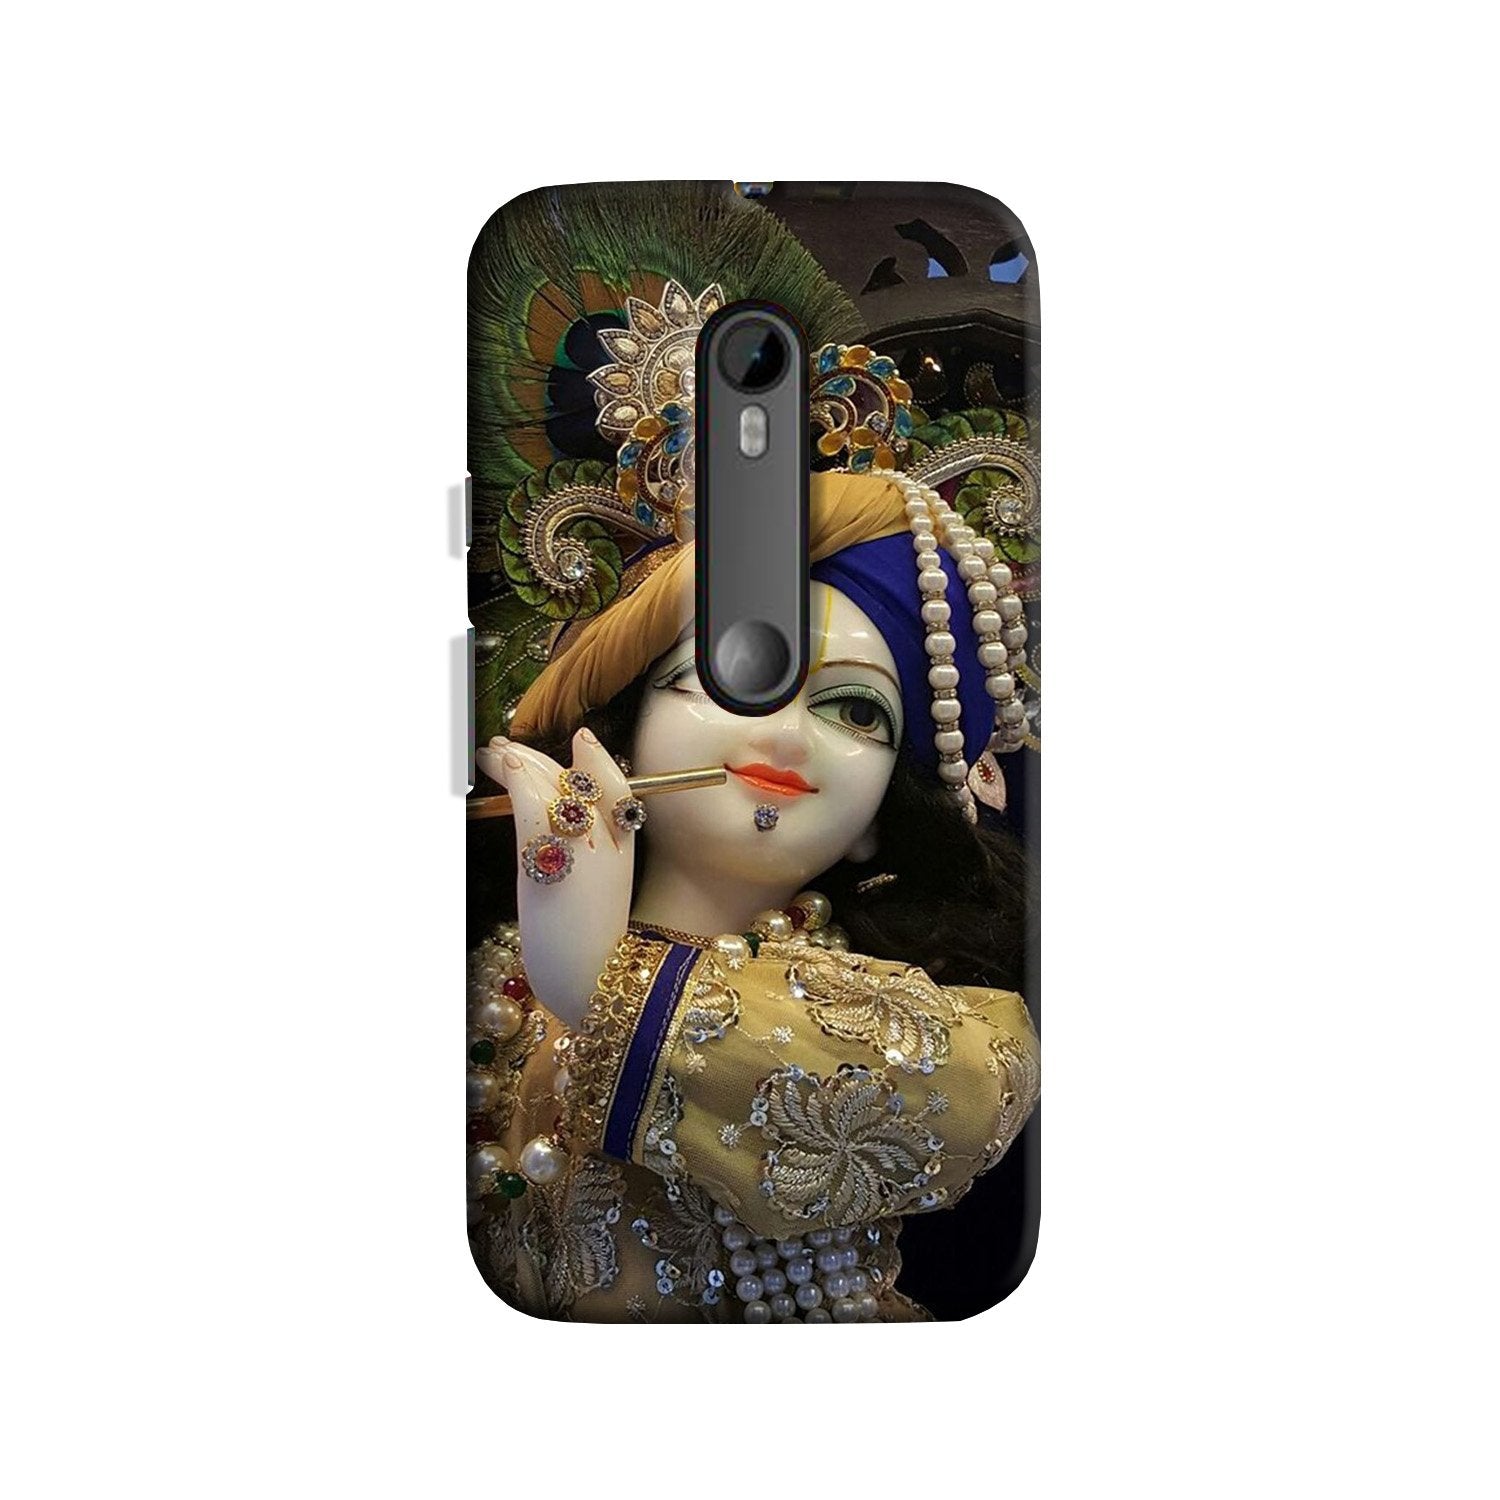 Lord Krishna3 Case for Moto X Style